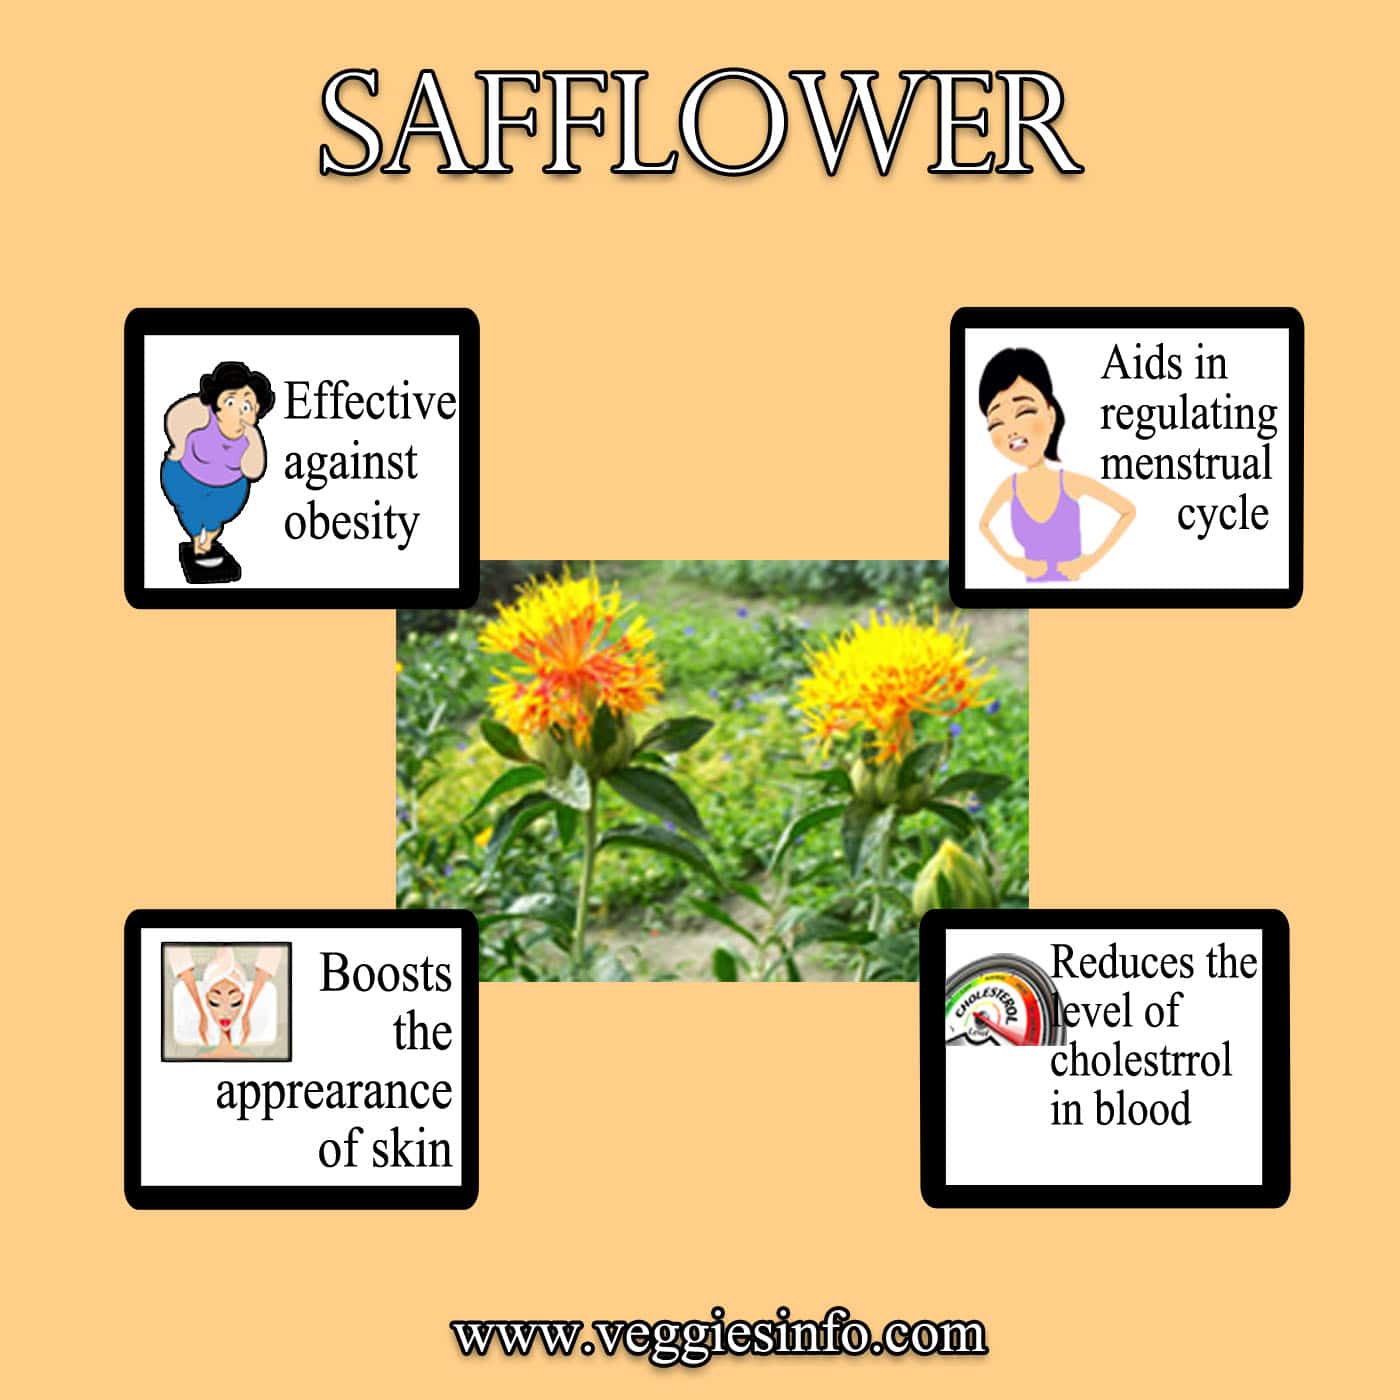 Safflower Medicinal And Health Uses